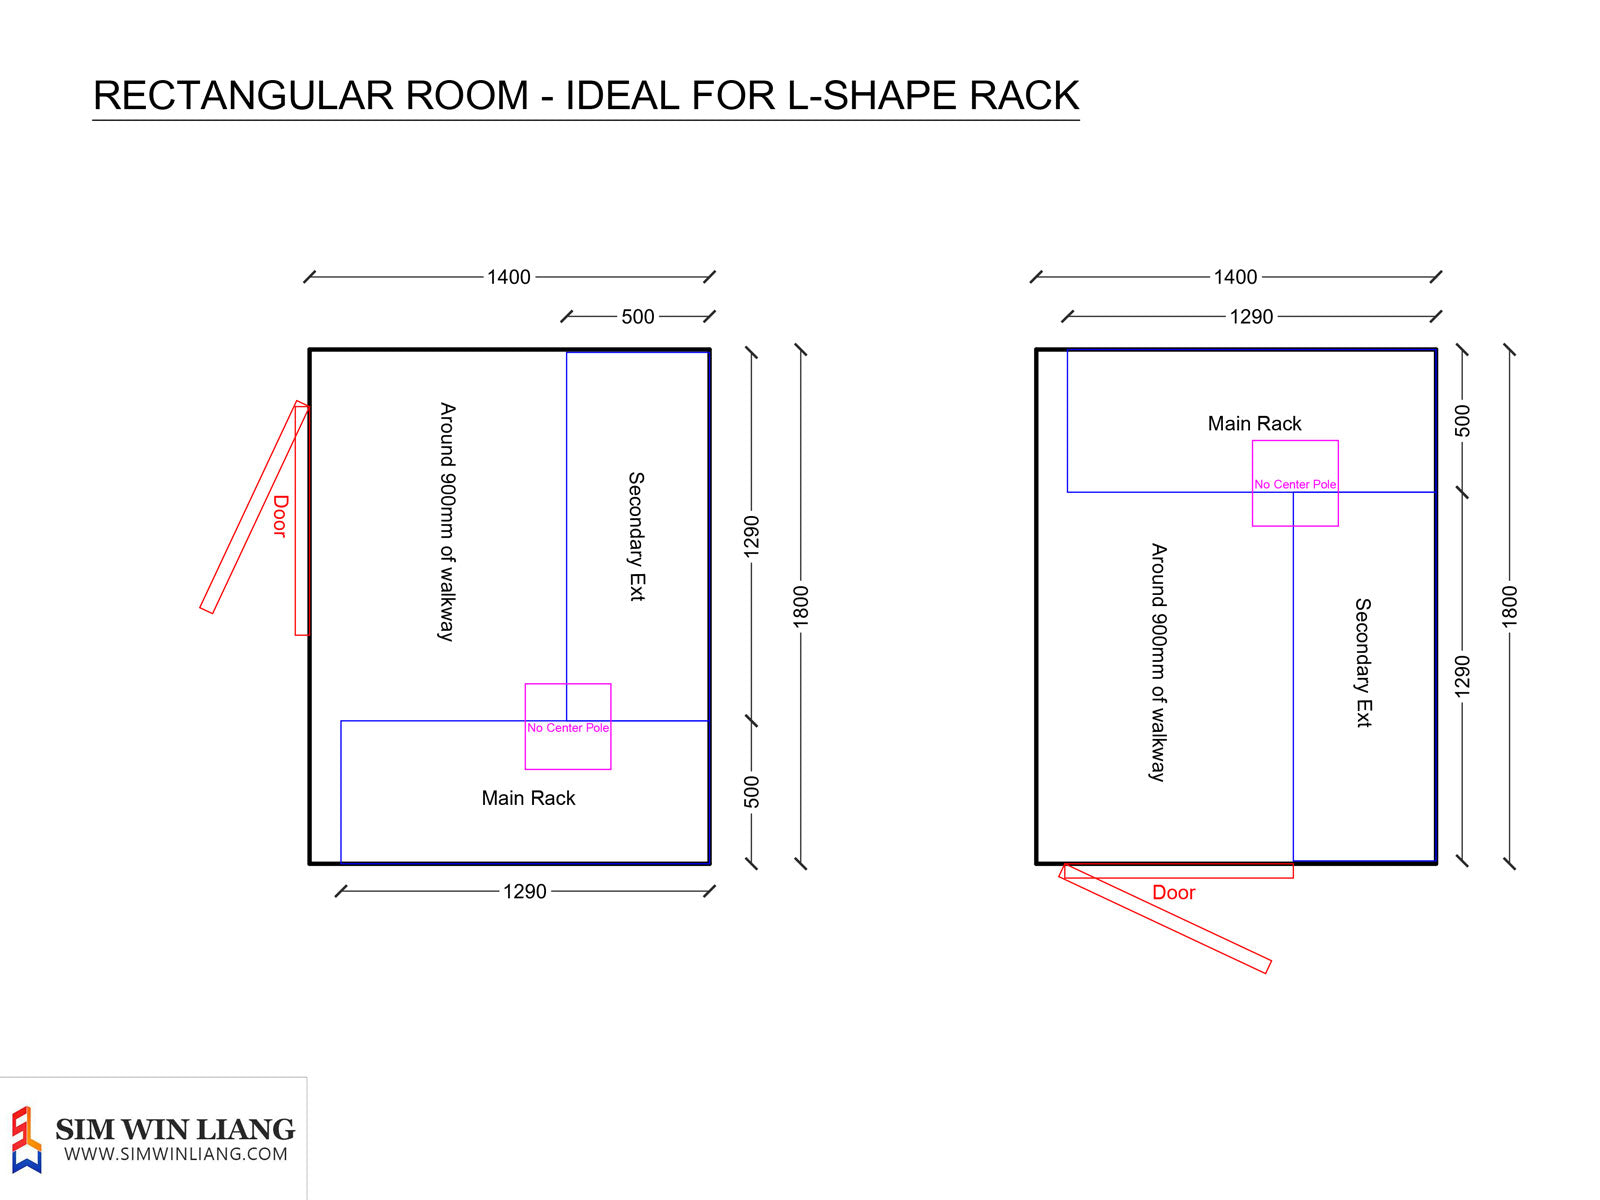 Recommended Rack Layout for Broad Rectangular Bomb Shelter or Storeroom by SIM WIN LIANG